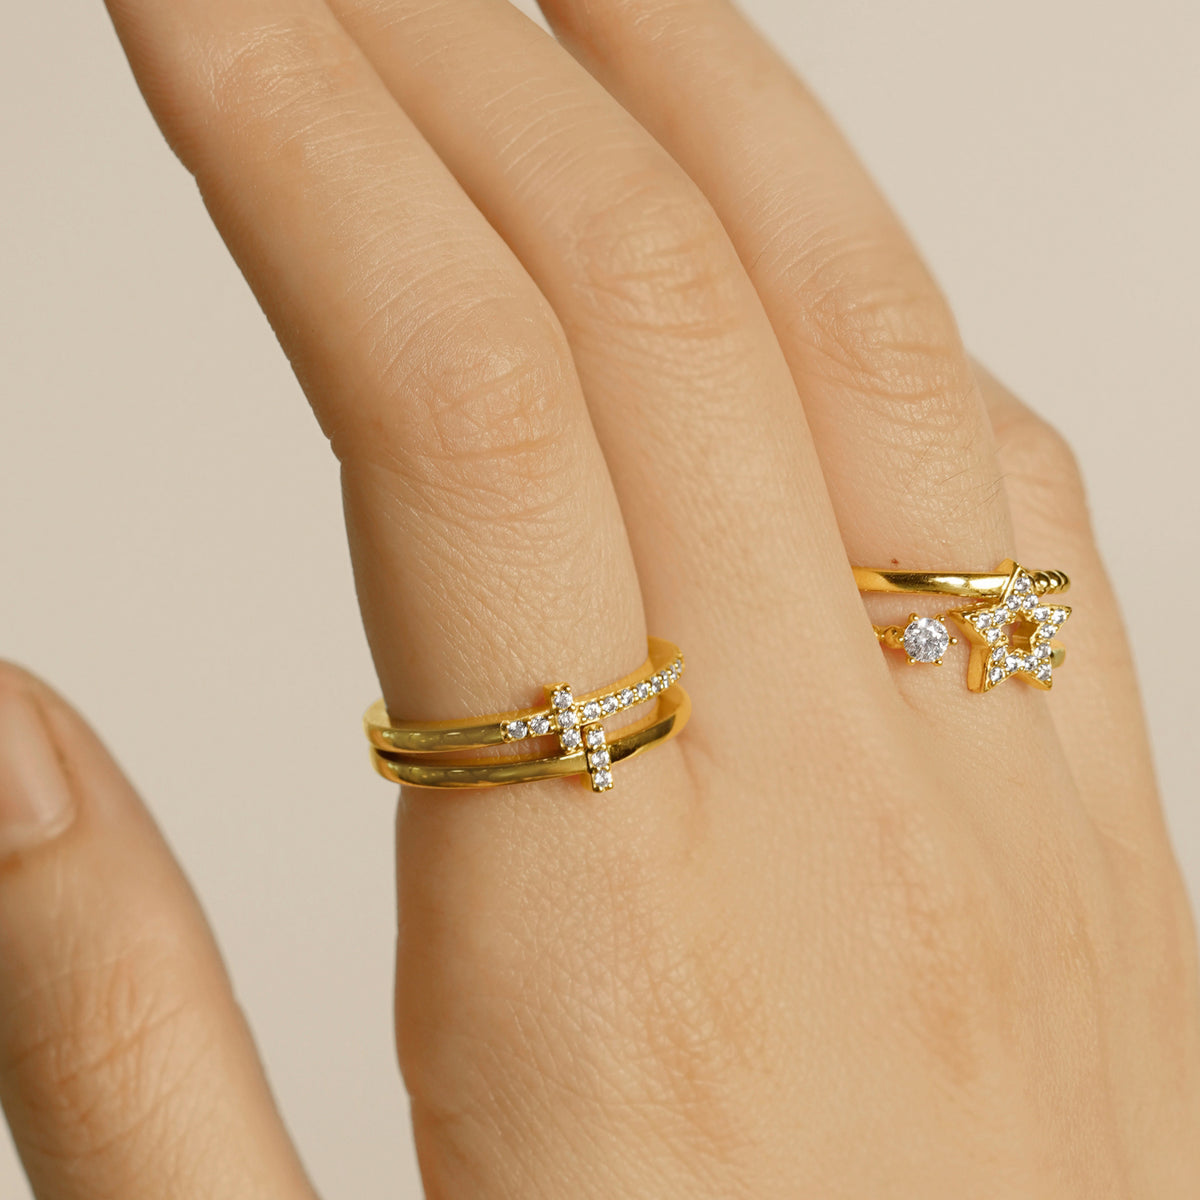 2 Piece Stackable Ring Set